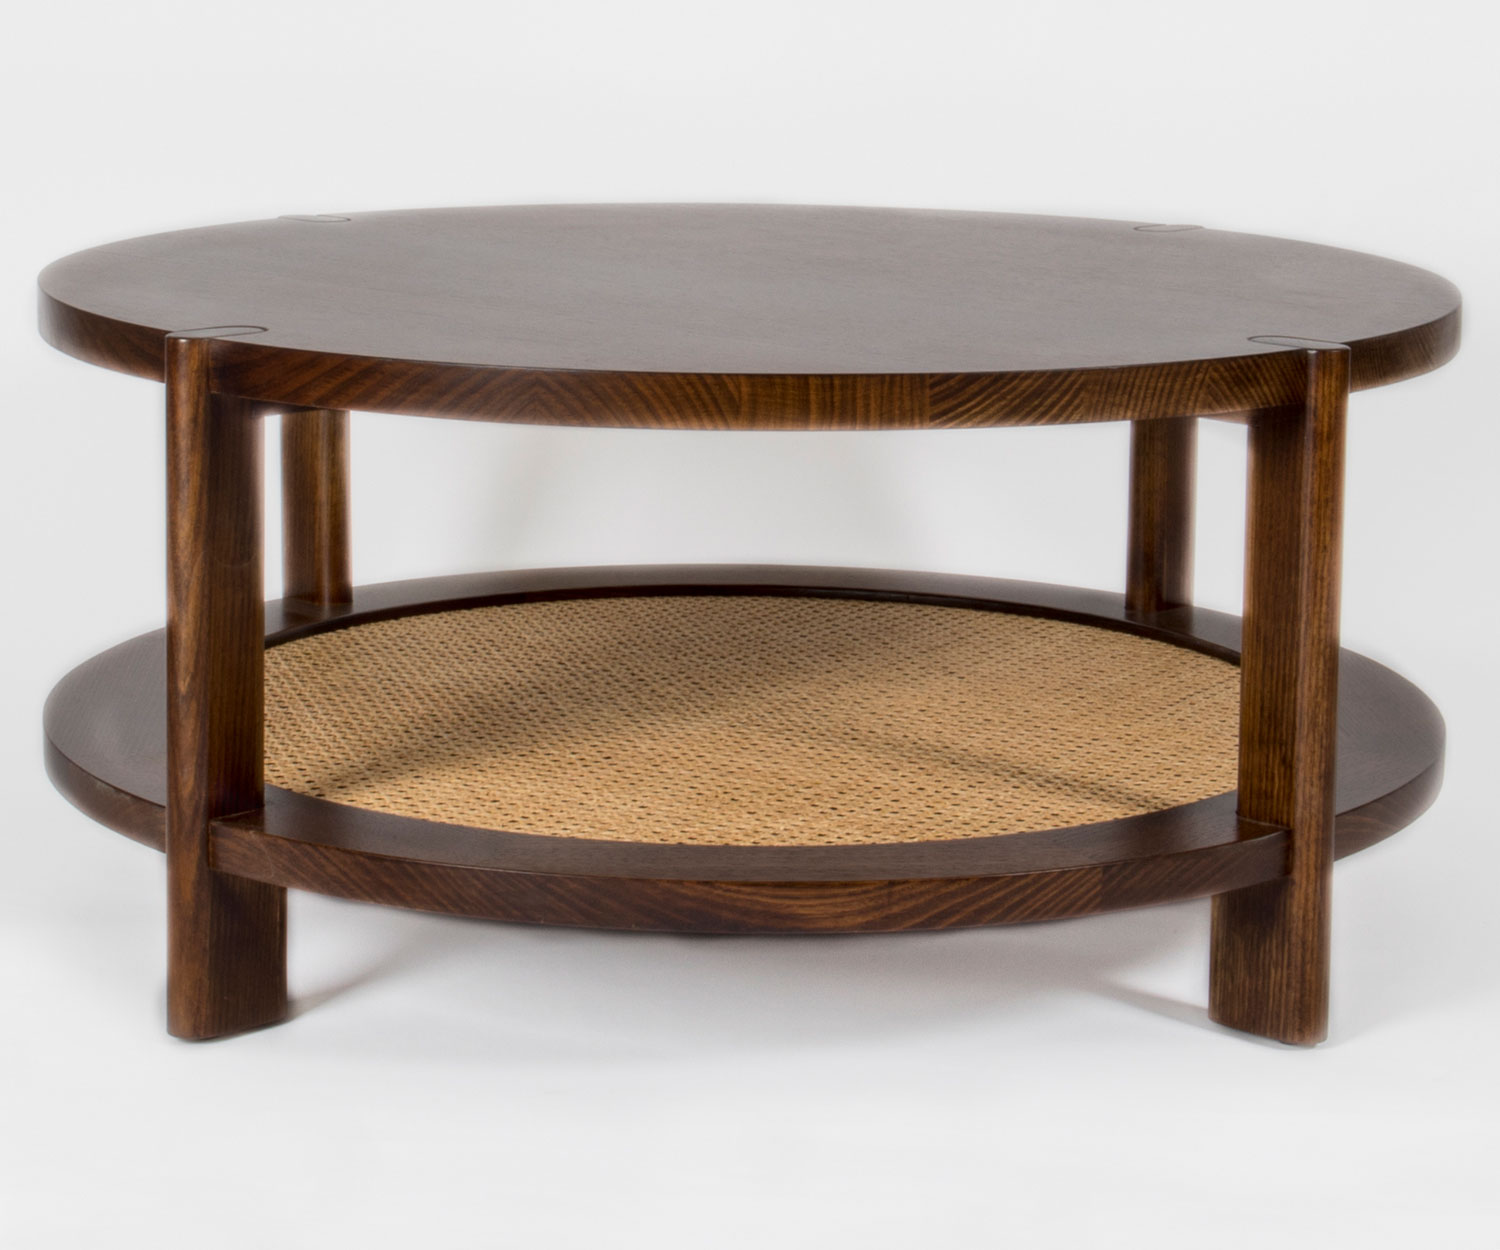 Cambridge Coffee Table made by FHG Australian Furniture Manufacturer.